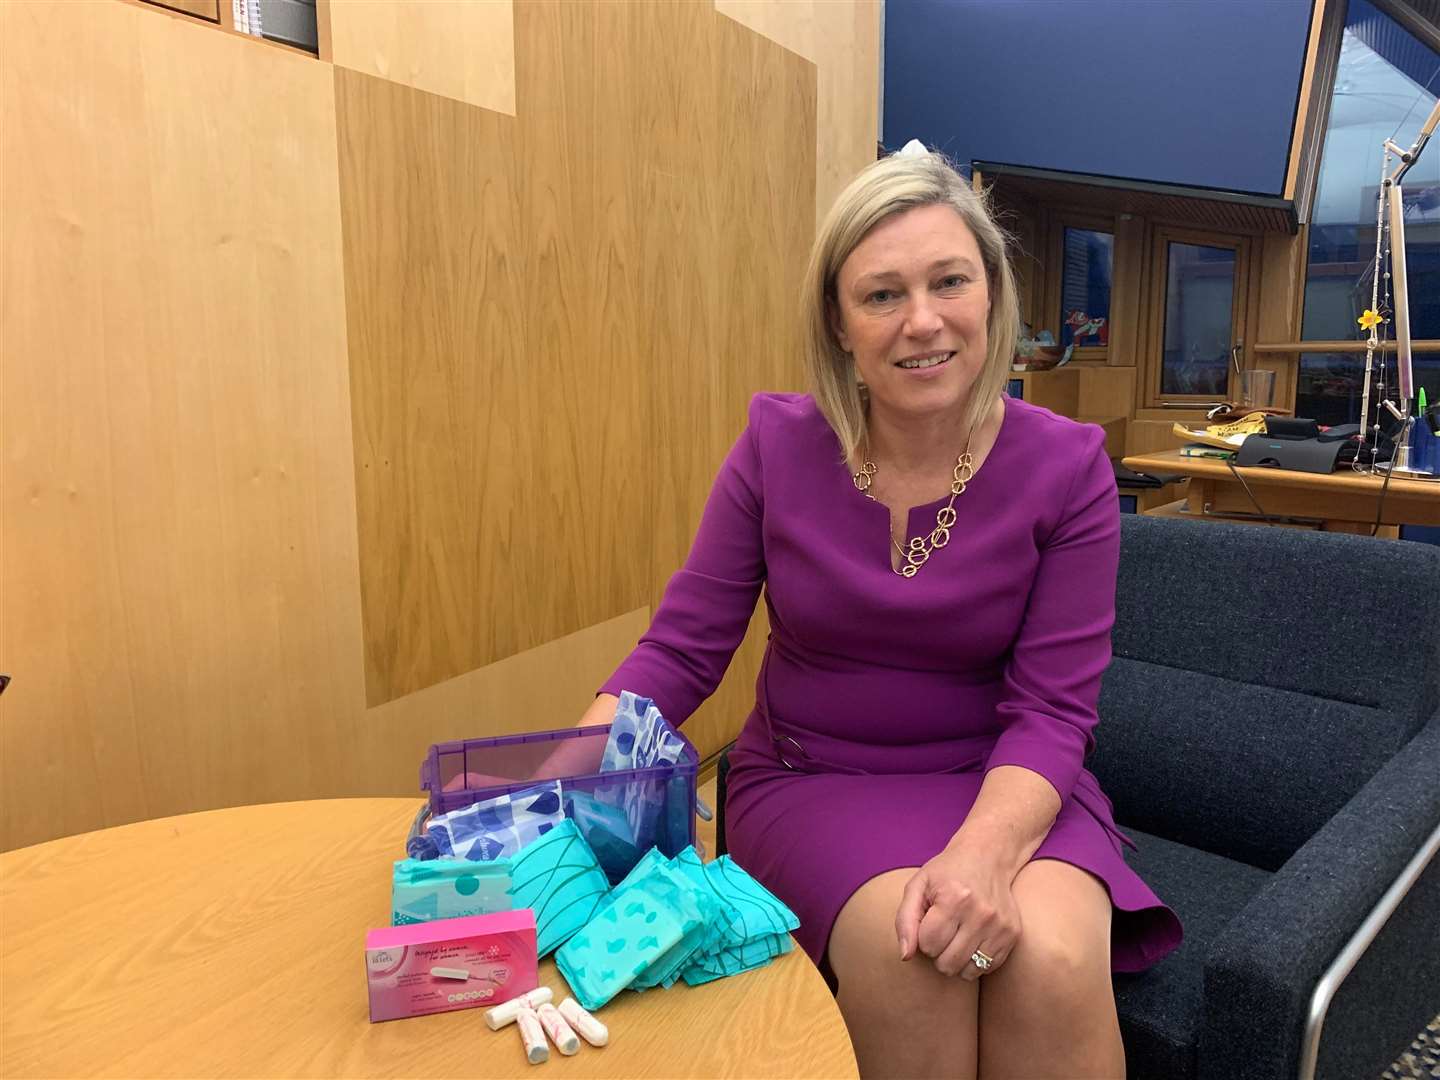 Aberdeenshire East MSP Gillian Martin welcomed the launch of the app